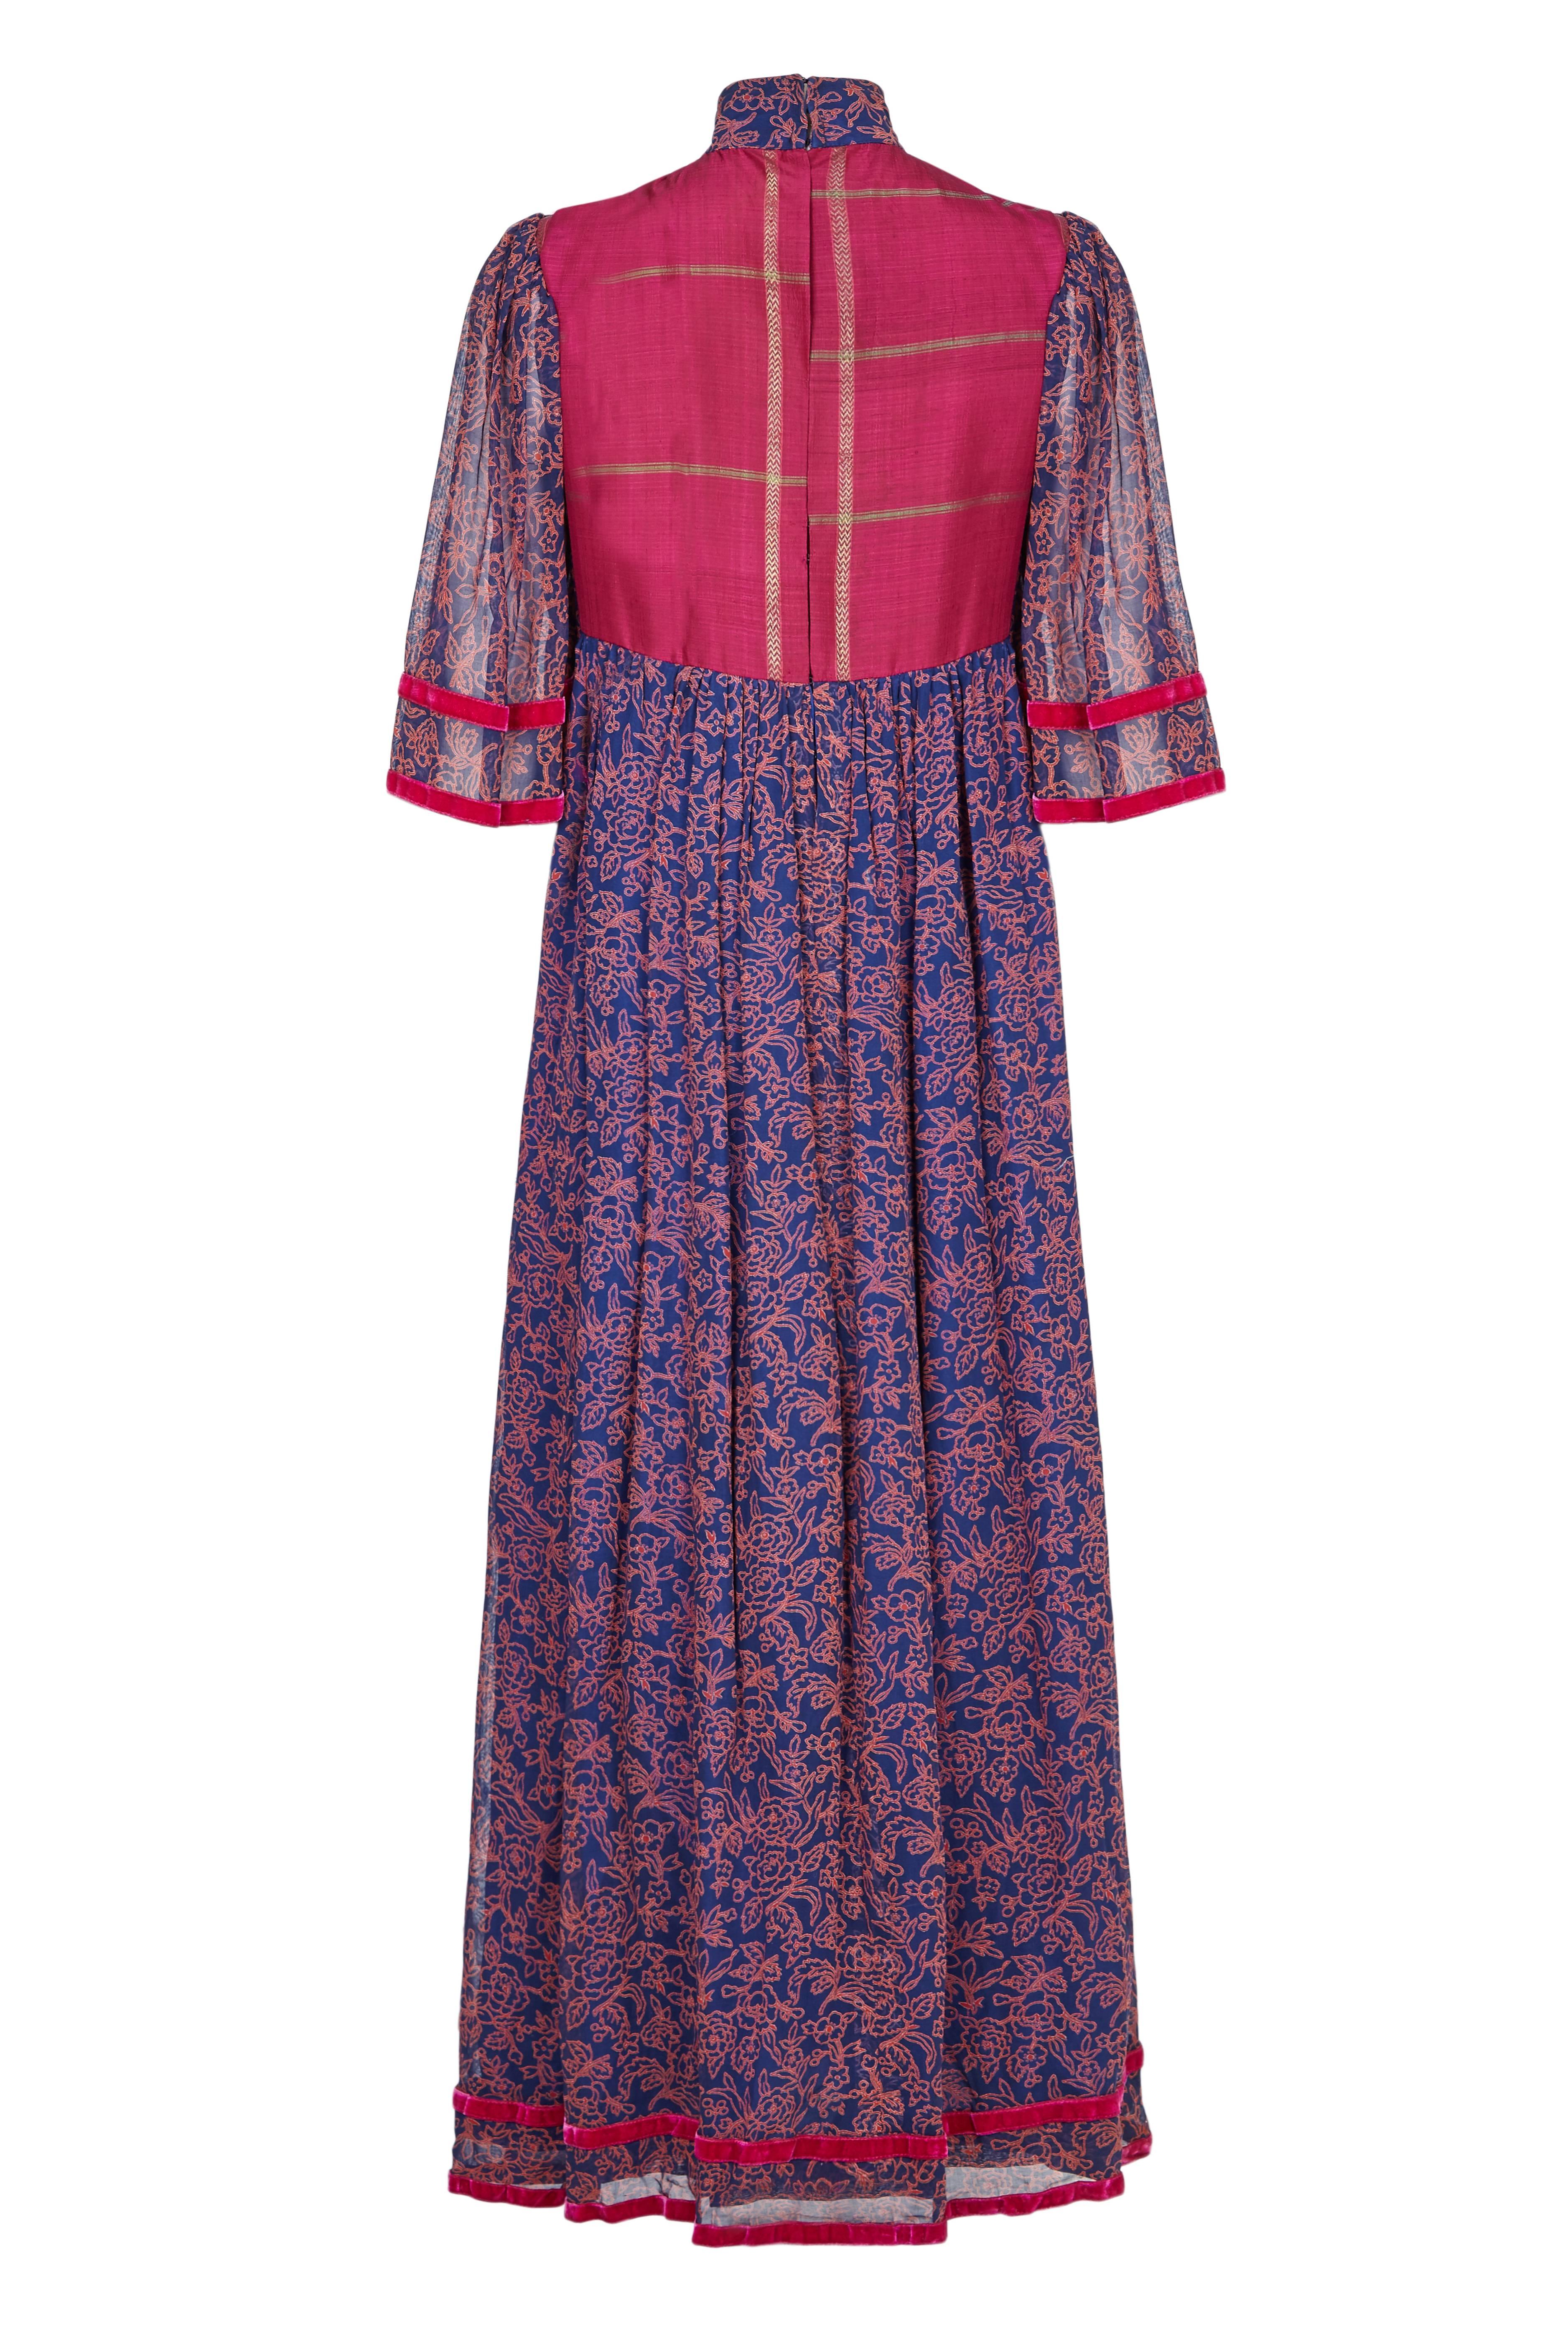 A gorgeous example of the Thea Porter ‘Faye’ dress dating between 1968 and 1970.  This piece is made in a printed deep purple and pink georgette with dainty floral pattern.  It has a pink velvet trim around the wide flowing sleeves and hem, and an